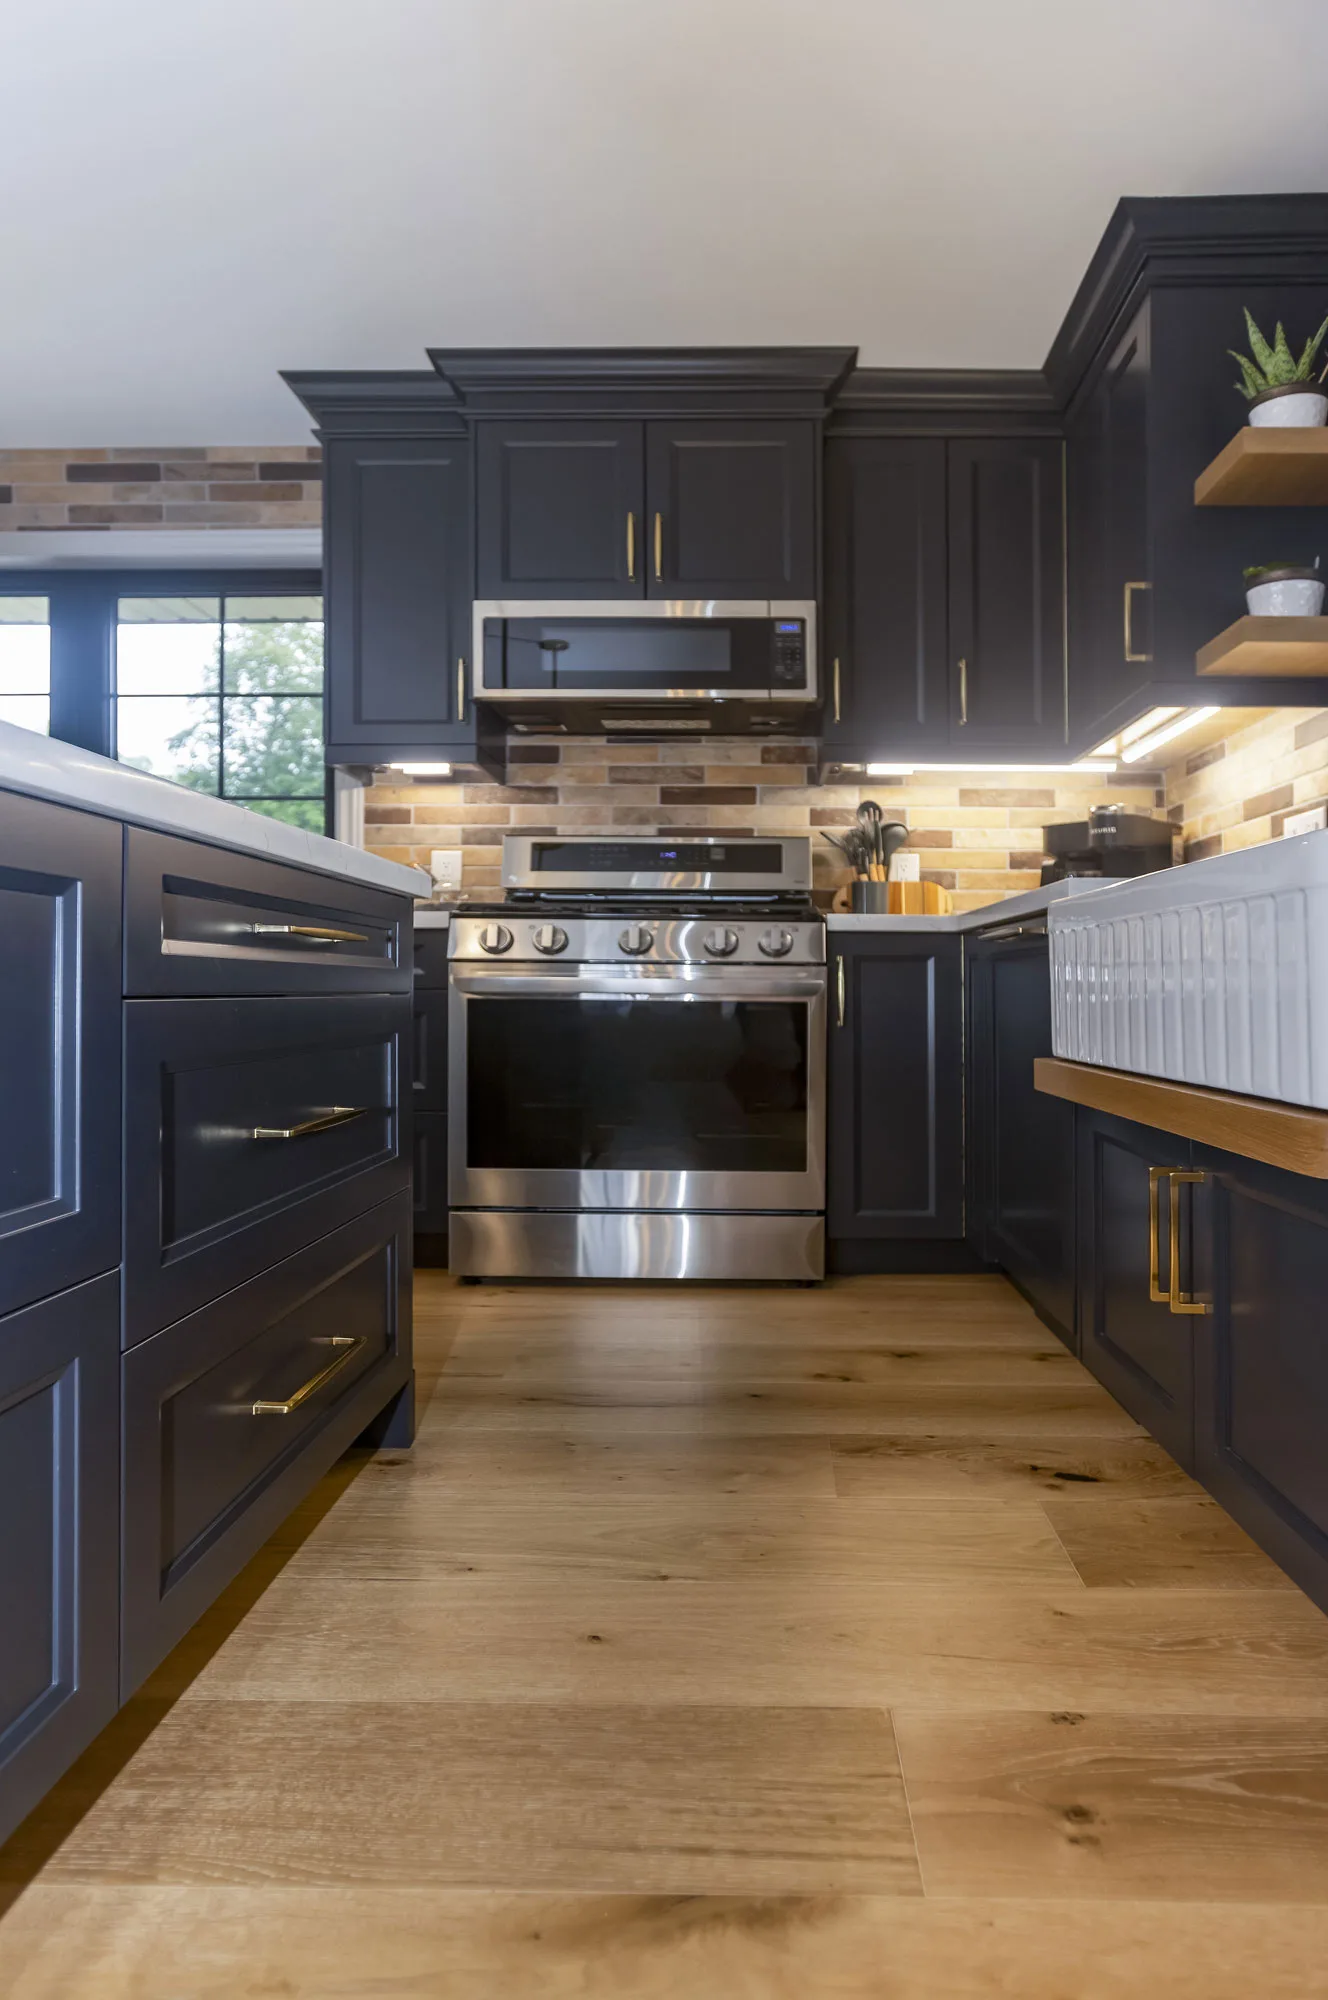 Kitchen with dark navy uppers and lowers with gold hardware and stainless steel appliances along with an island.